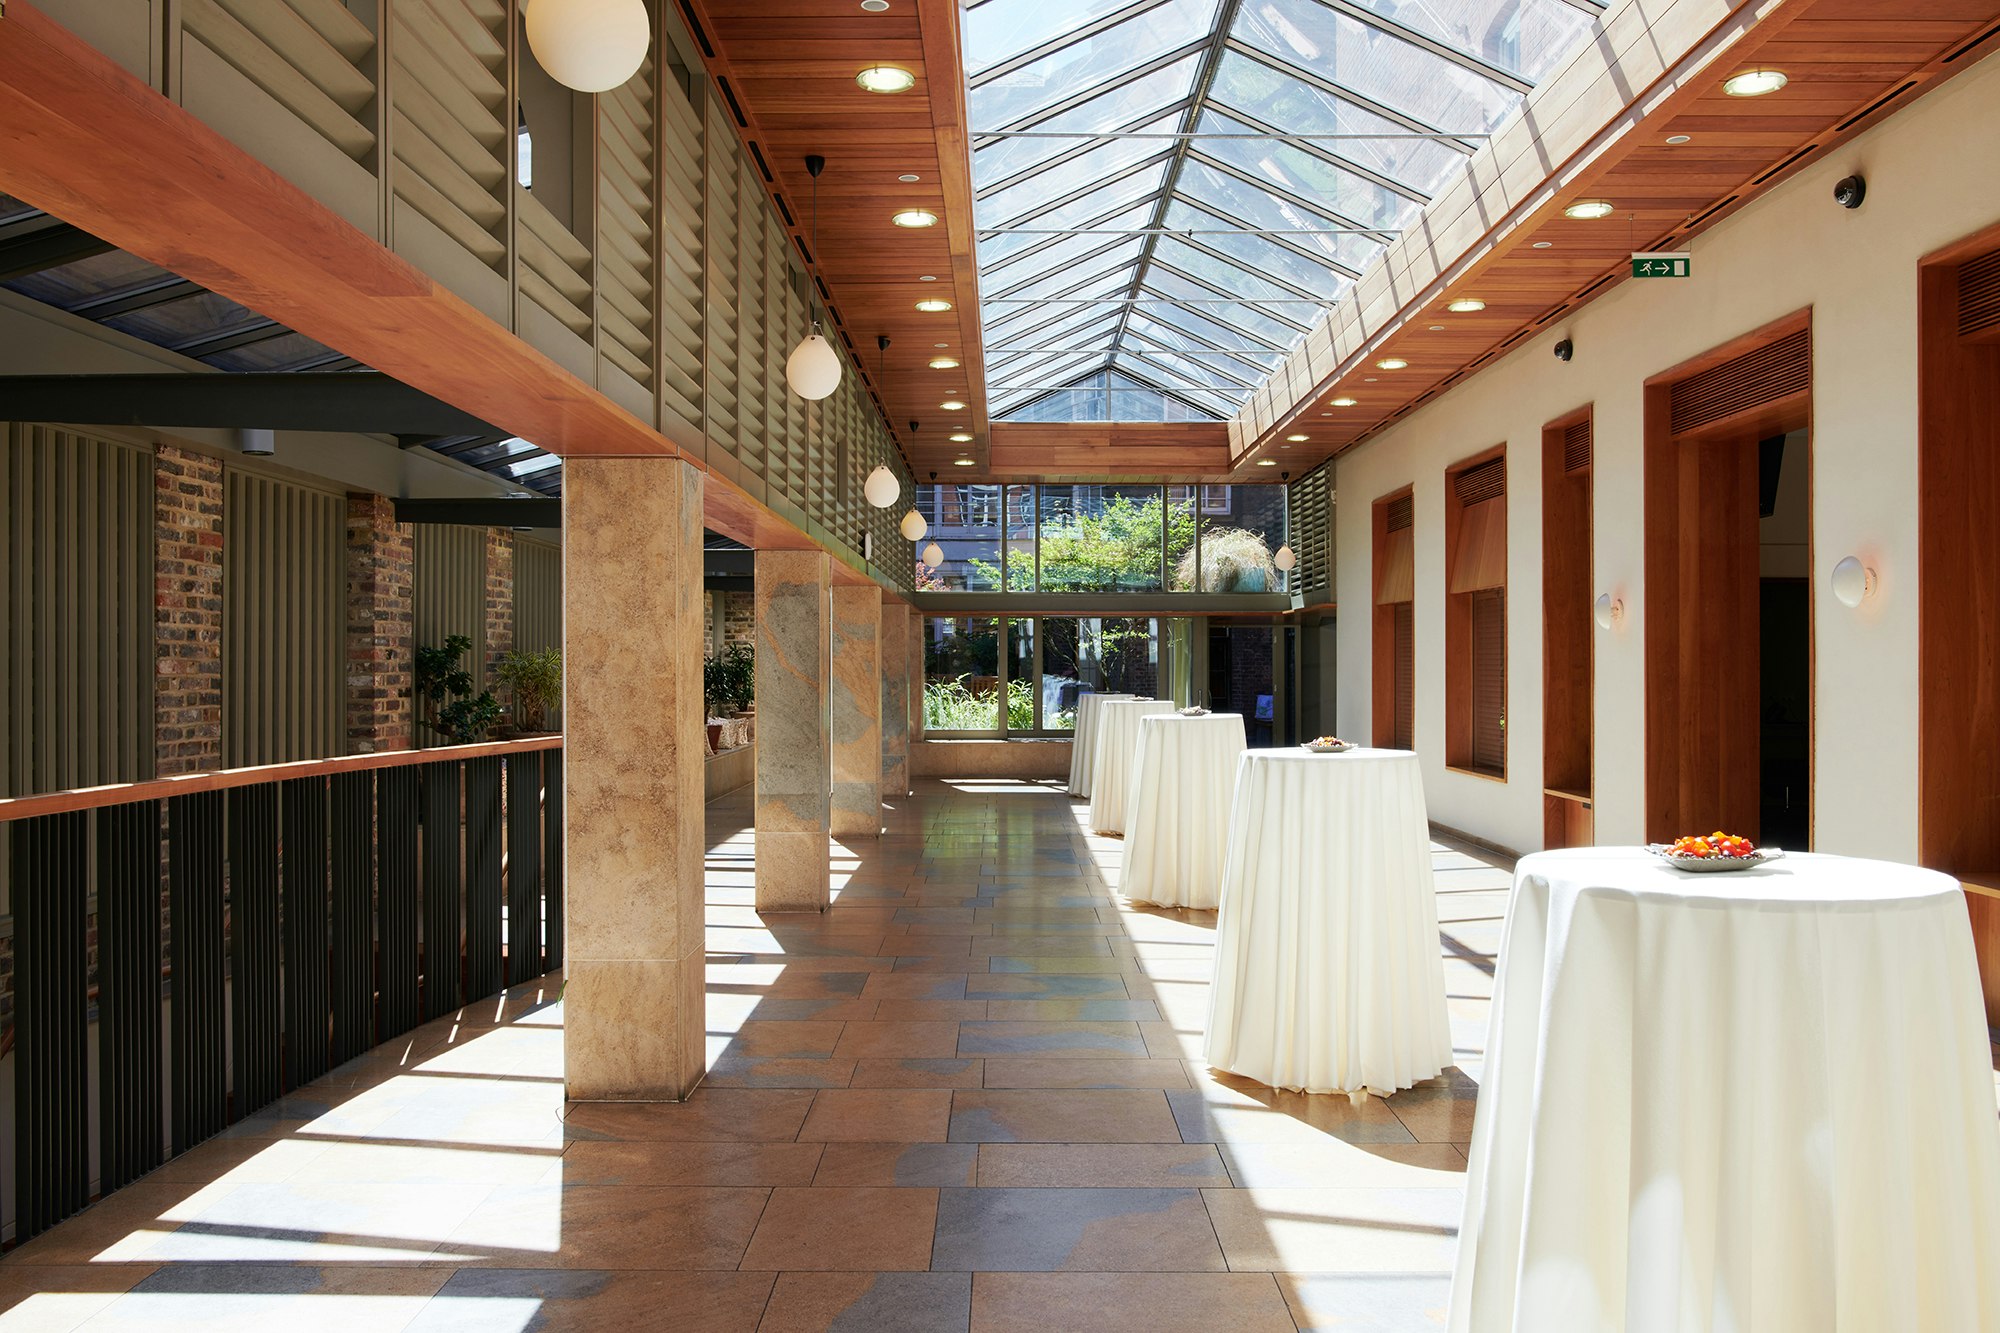 Sustainable Event Venues in London - No.11 Cavendish Square